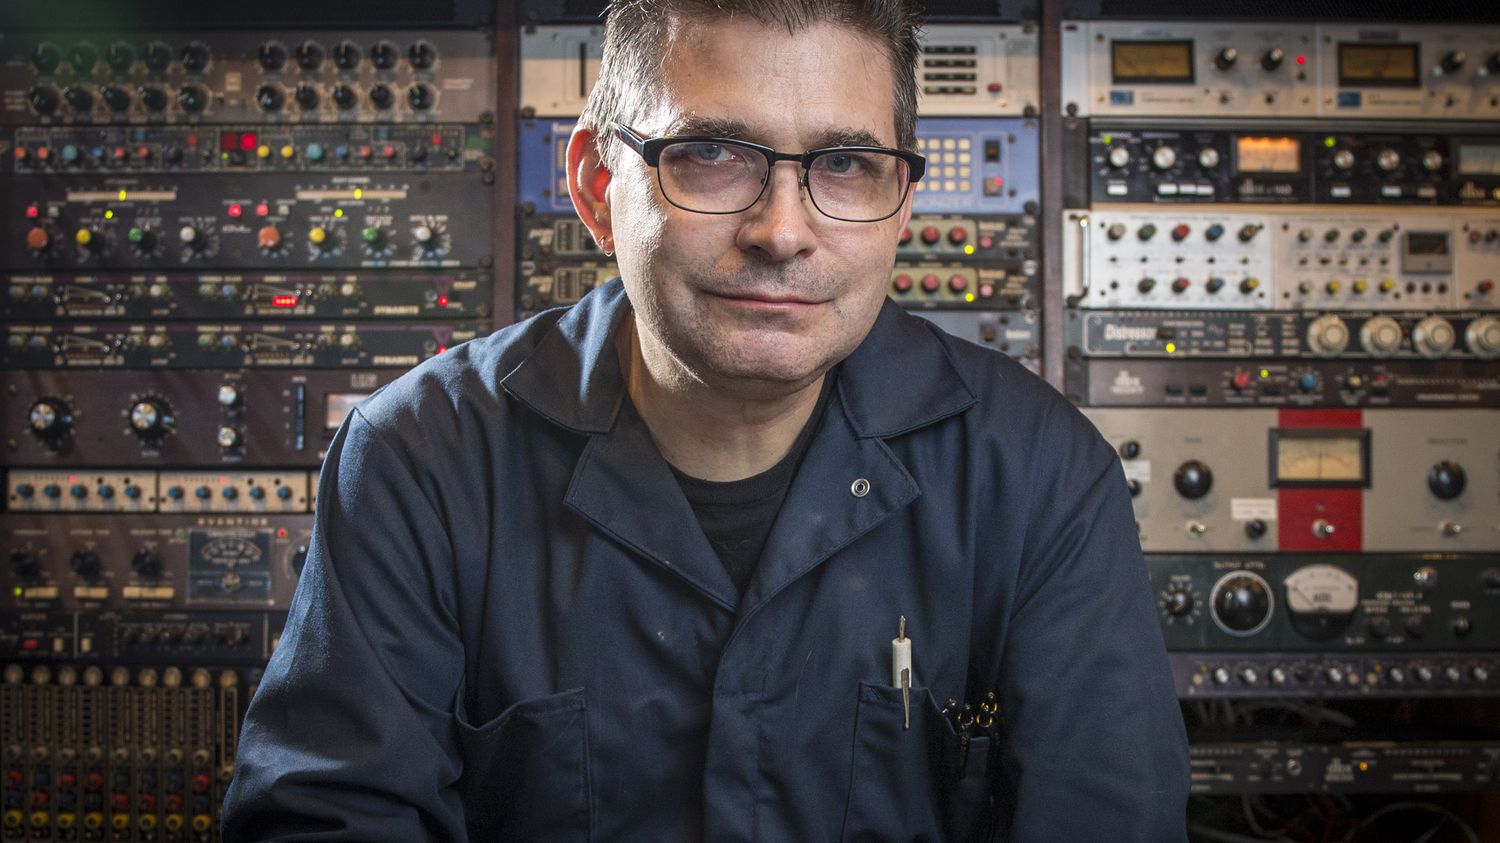 Steve Albini, rock producer for Nirvana, The Pixies and PJ Harvey, has died at the age of 61.